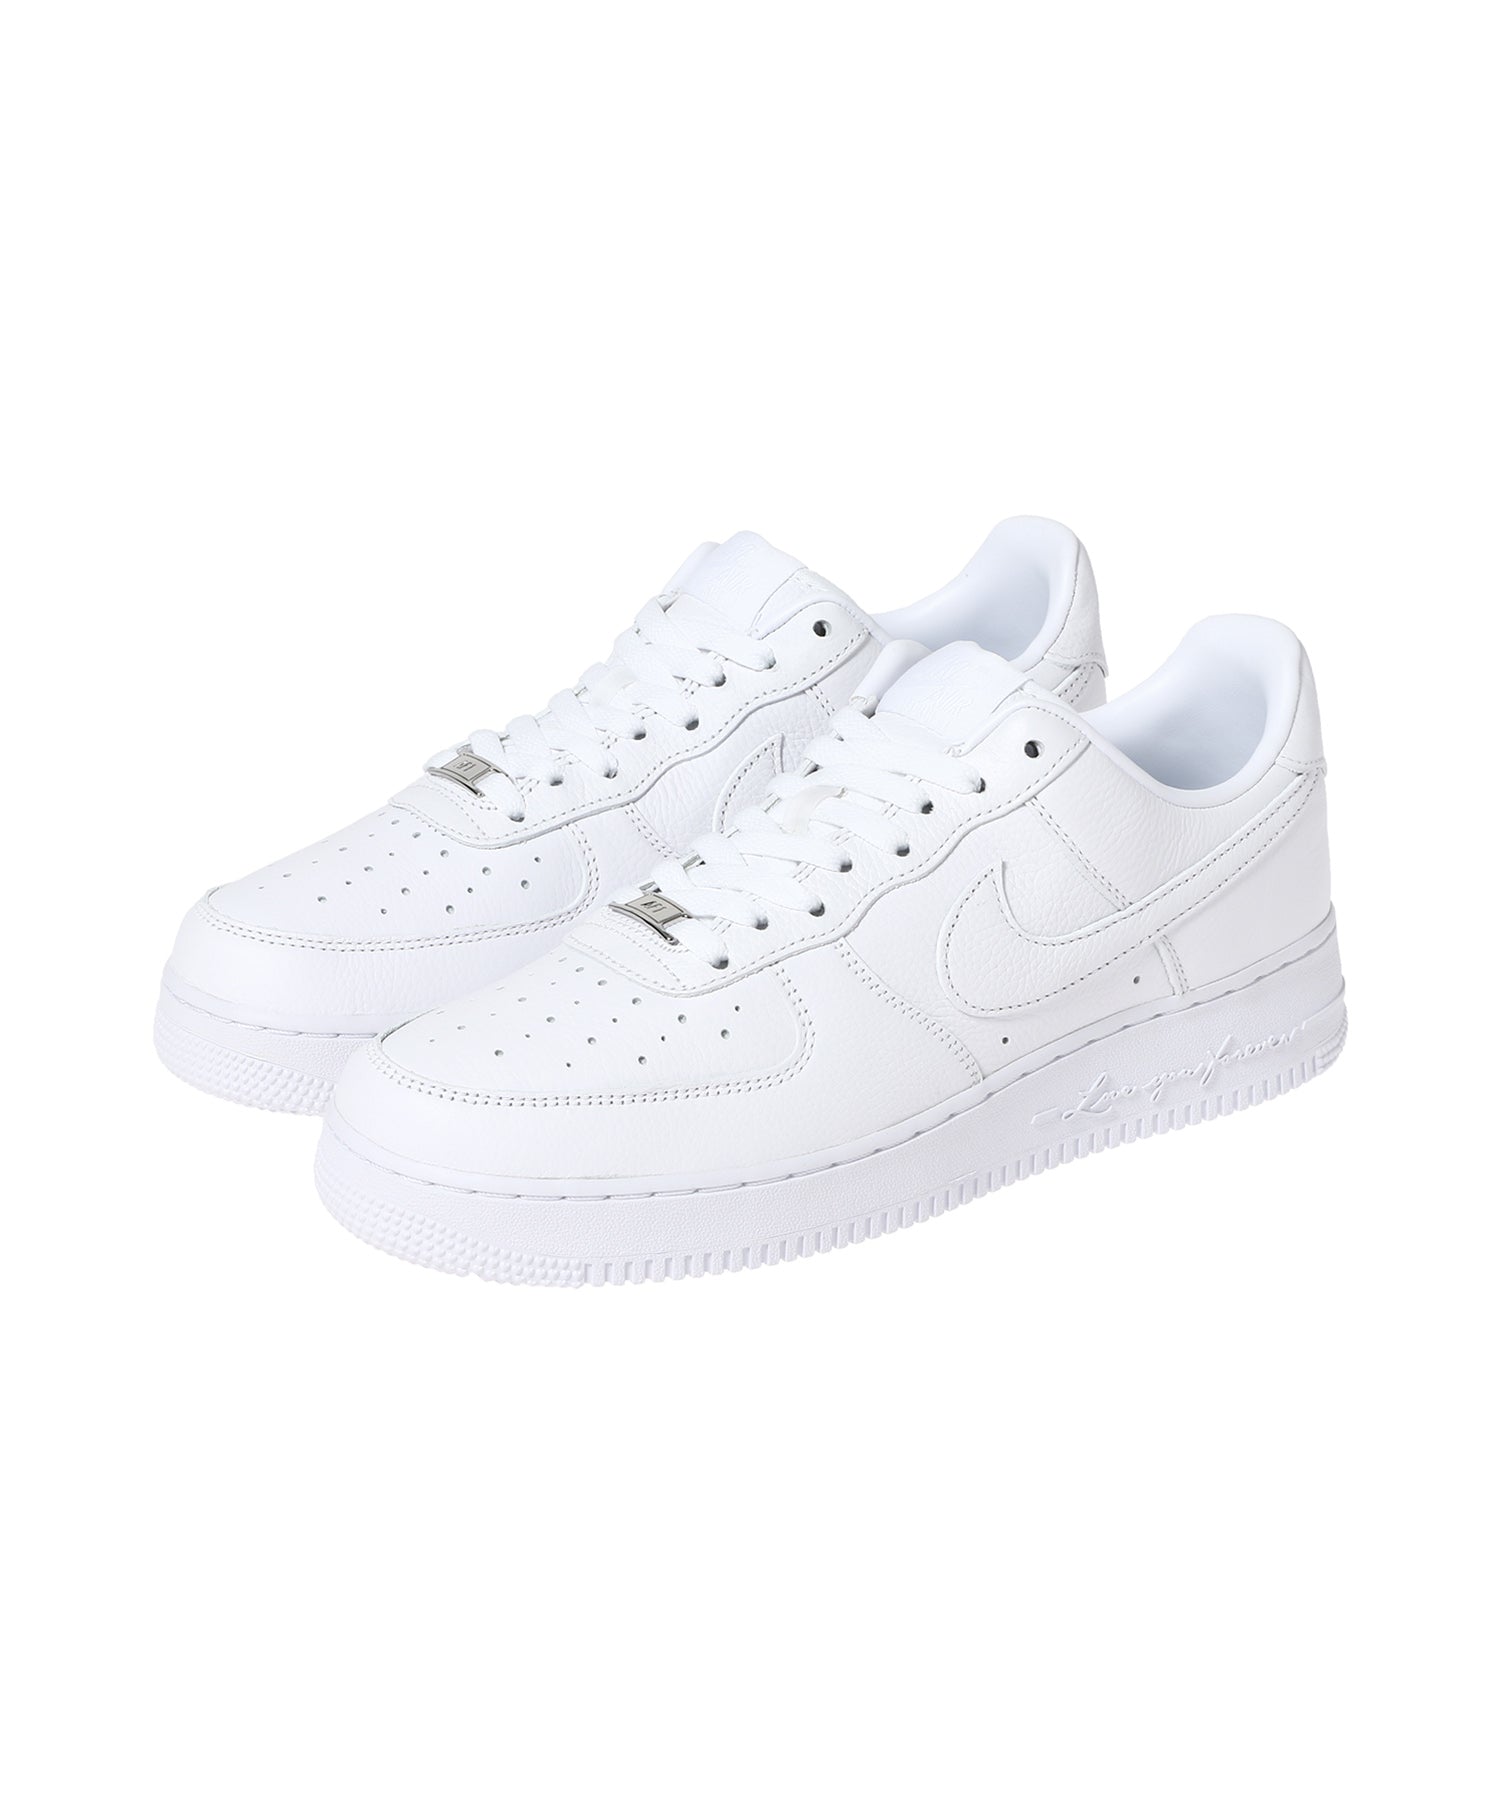 Nike Air Force 1 Low Sp